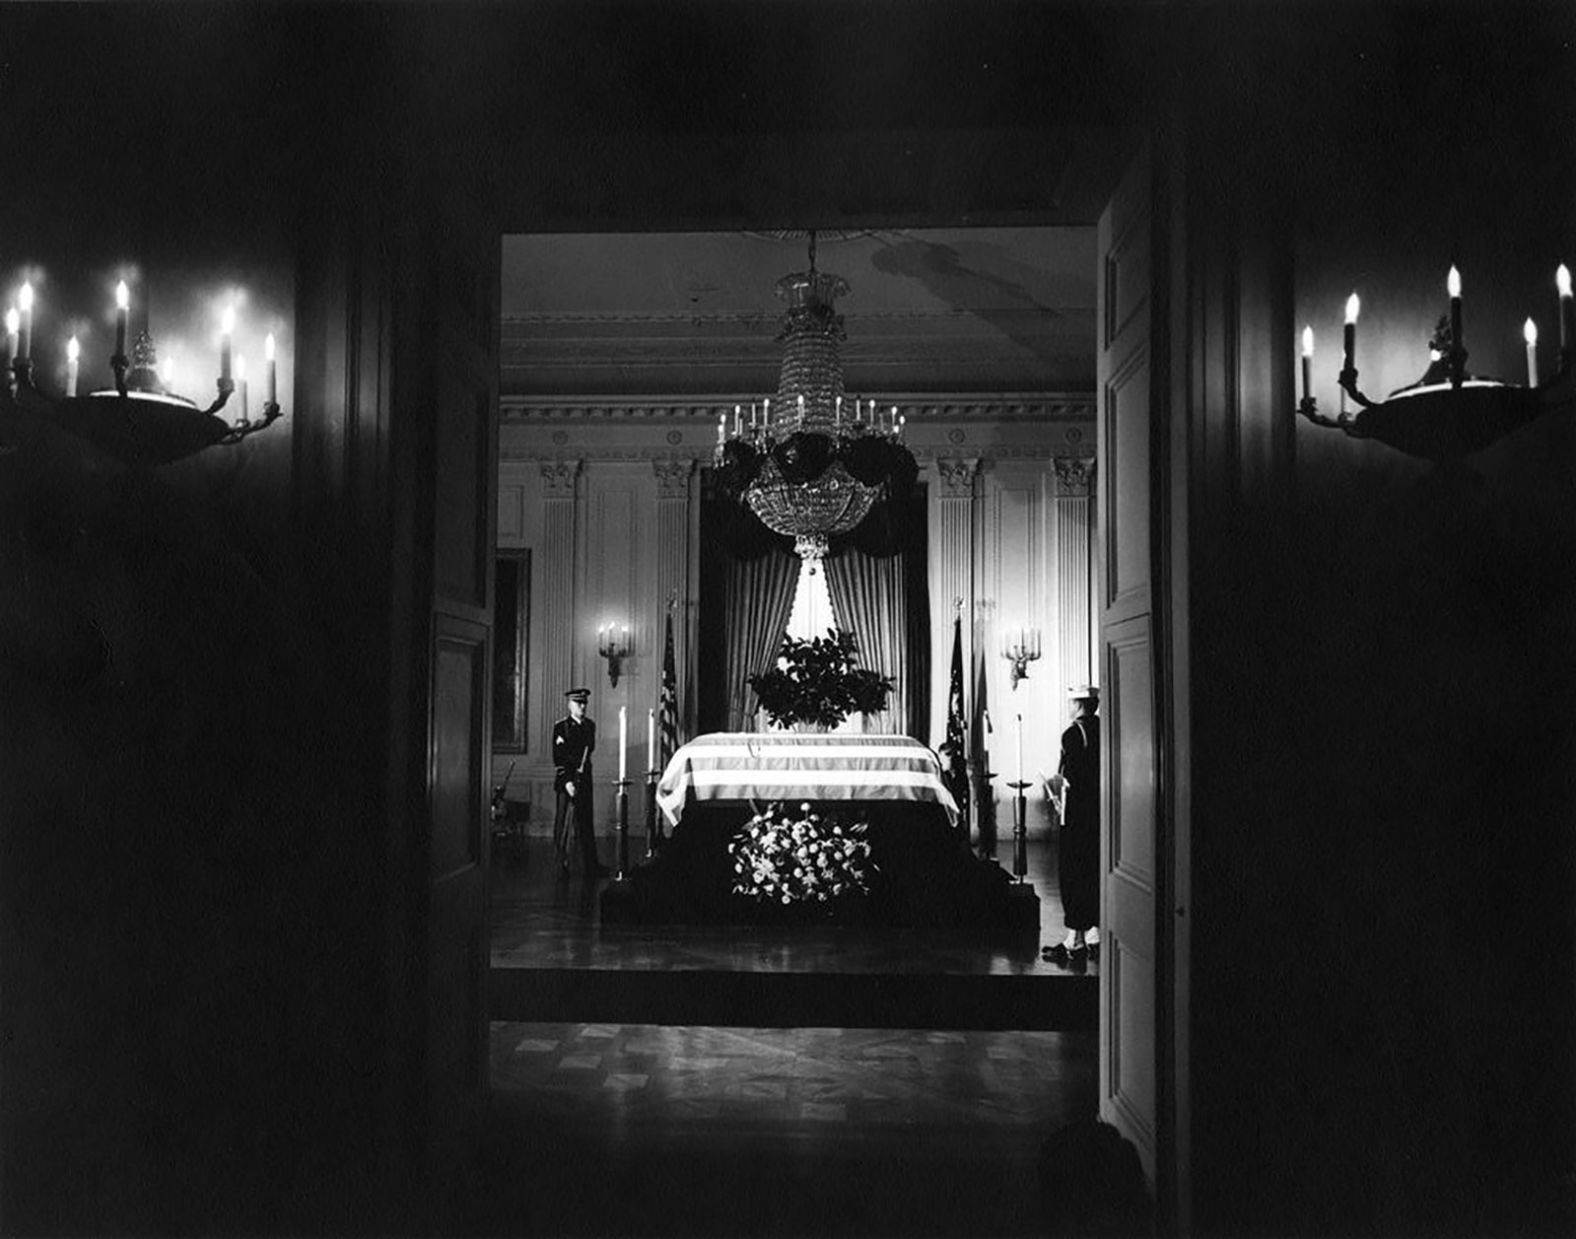 Kennedy's casket lies in state in the East Room of the White House on the day after the shooting.